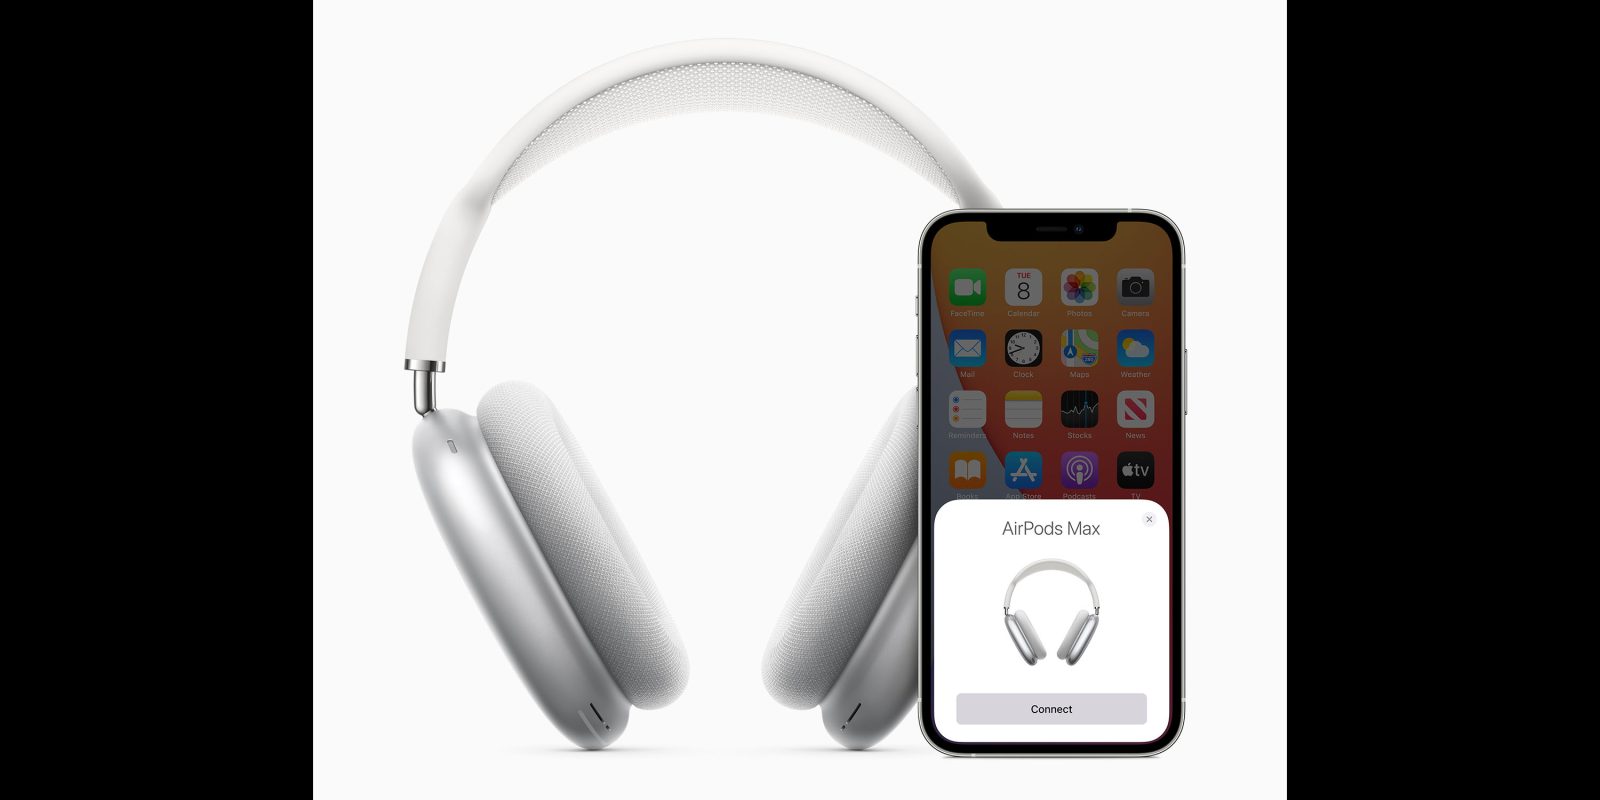 AirPods Max suppliers call it a niche product